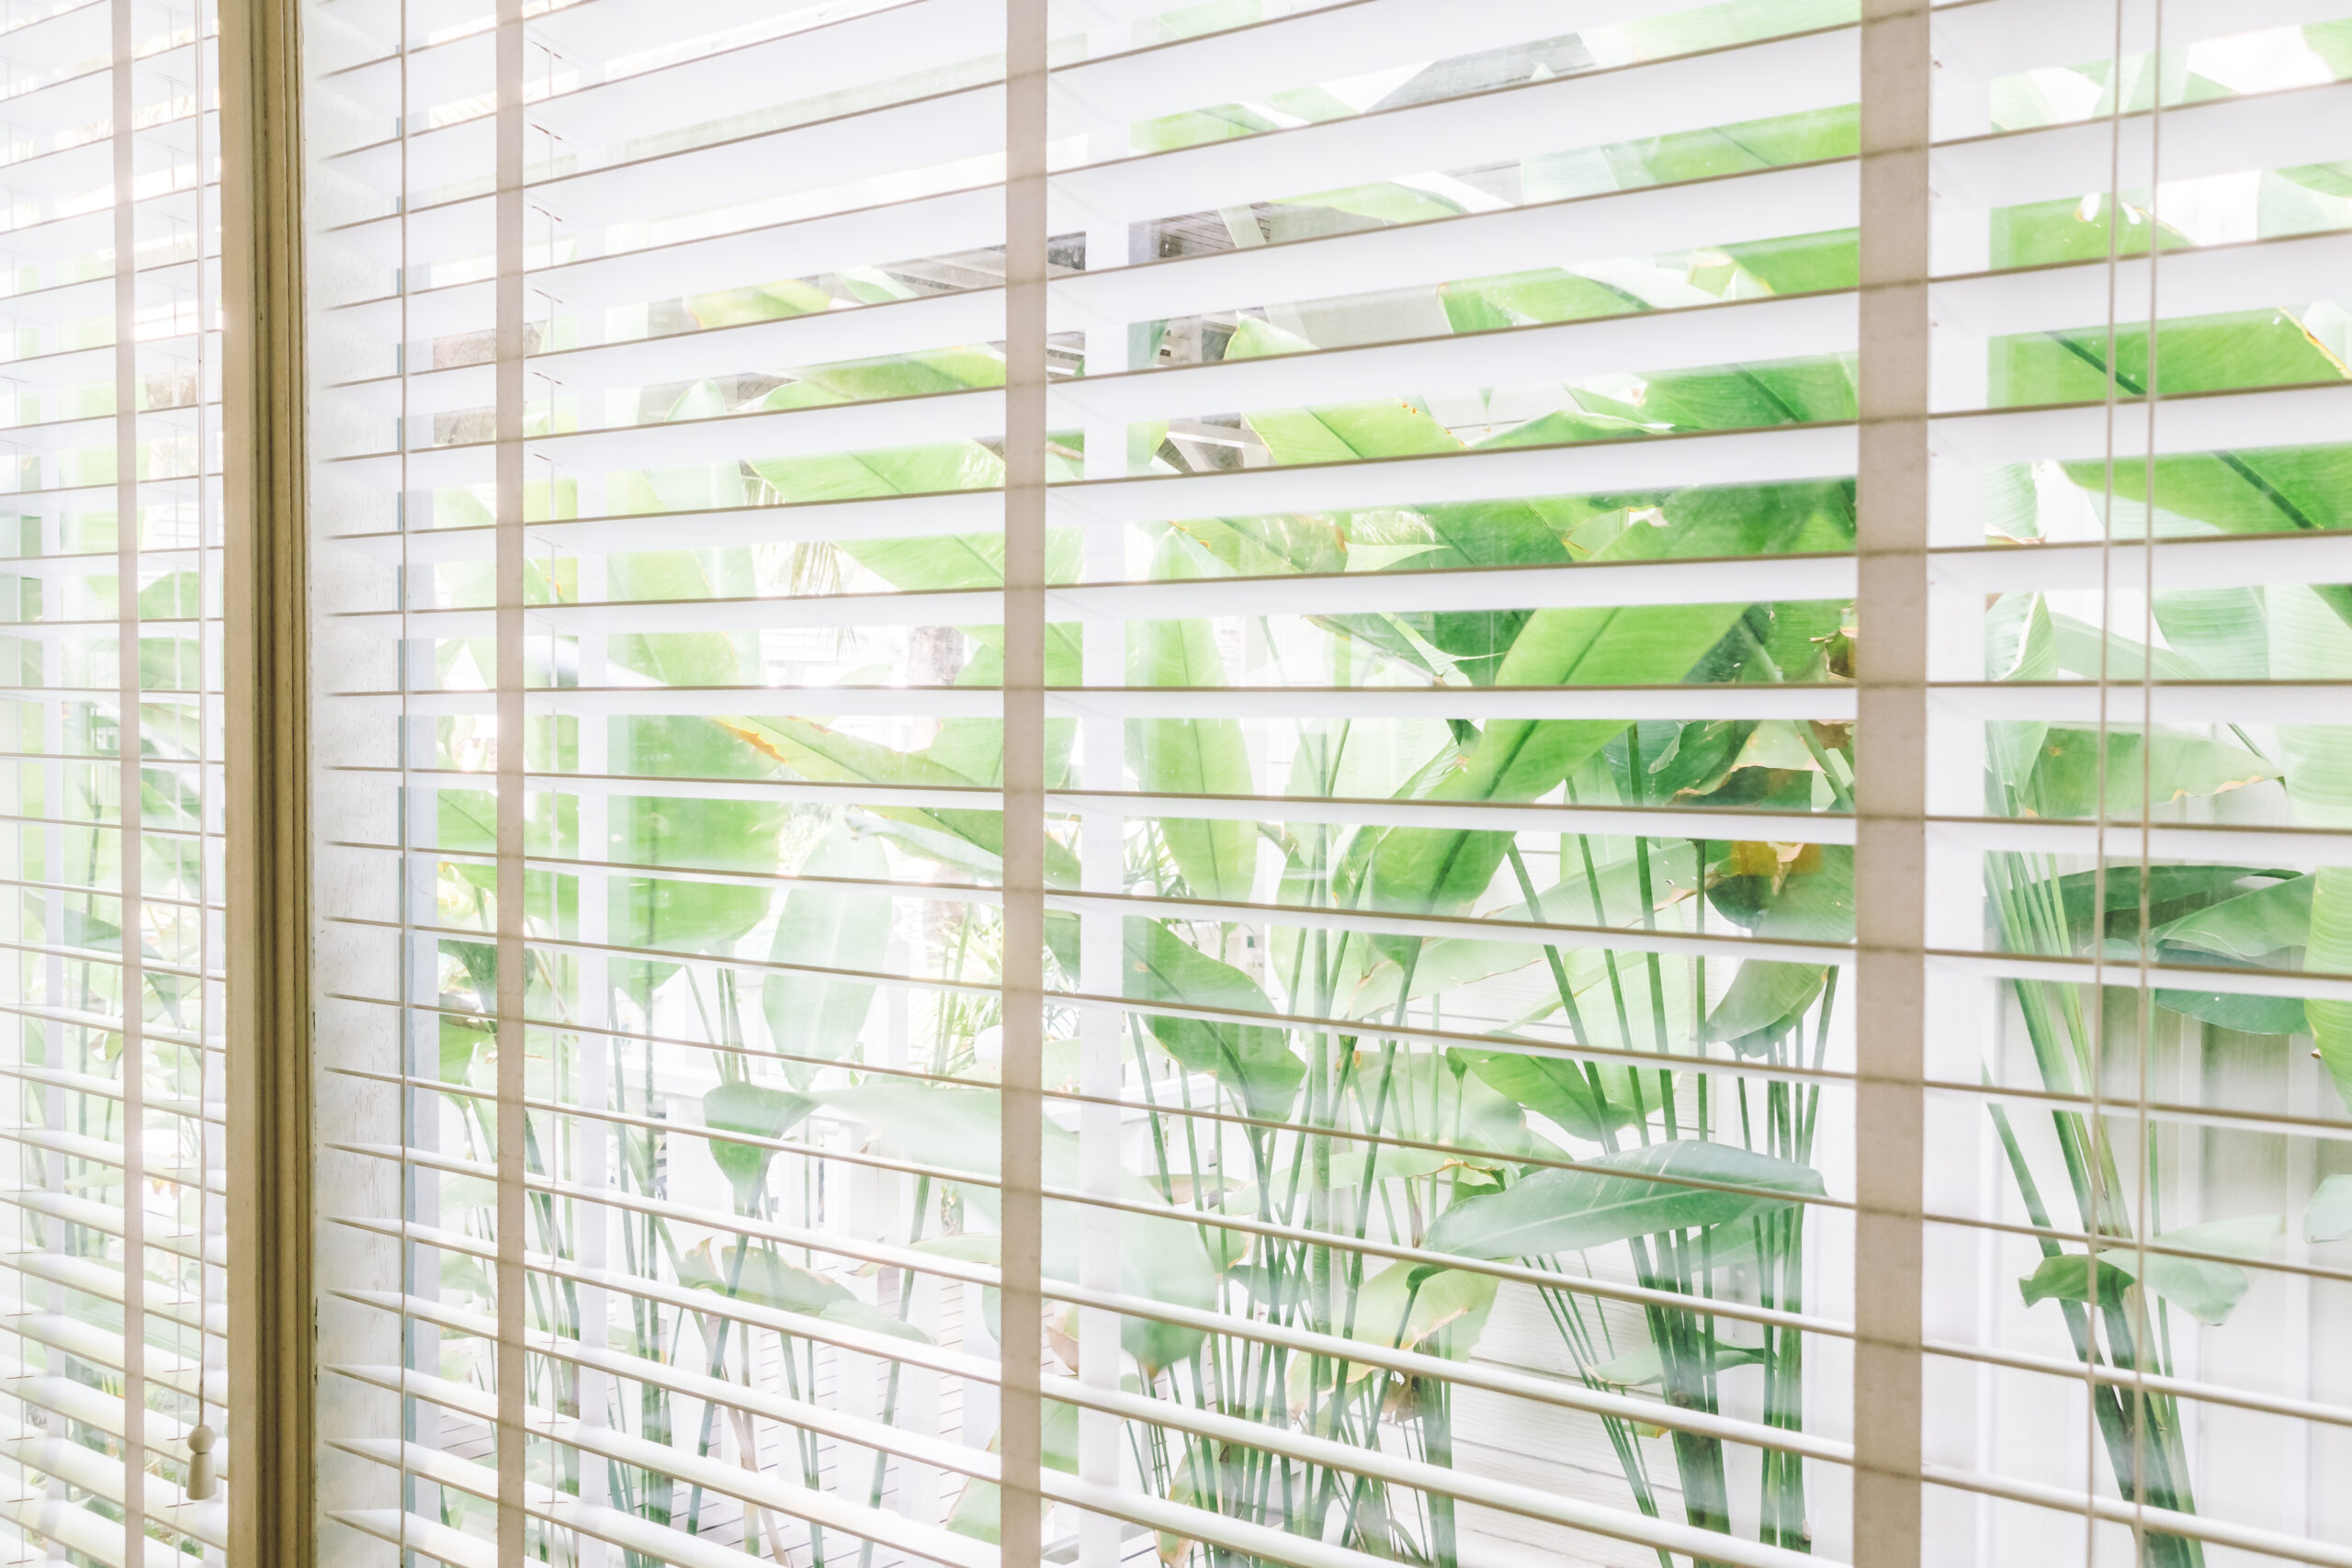 Bright outside space, seen through venetian blinds